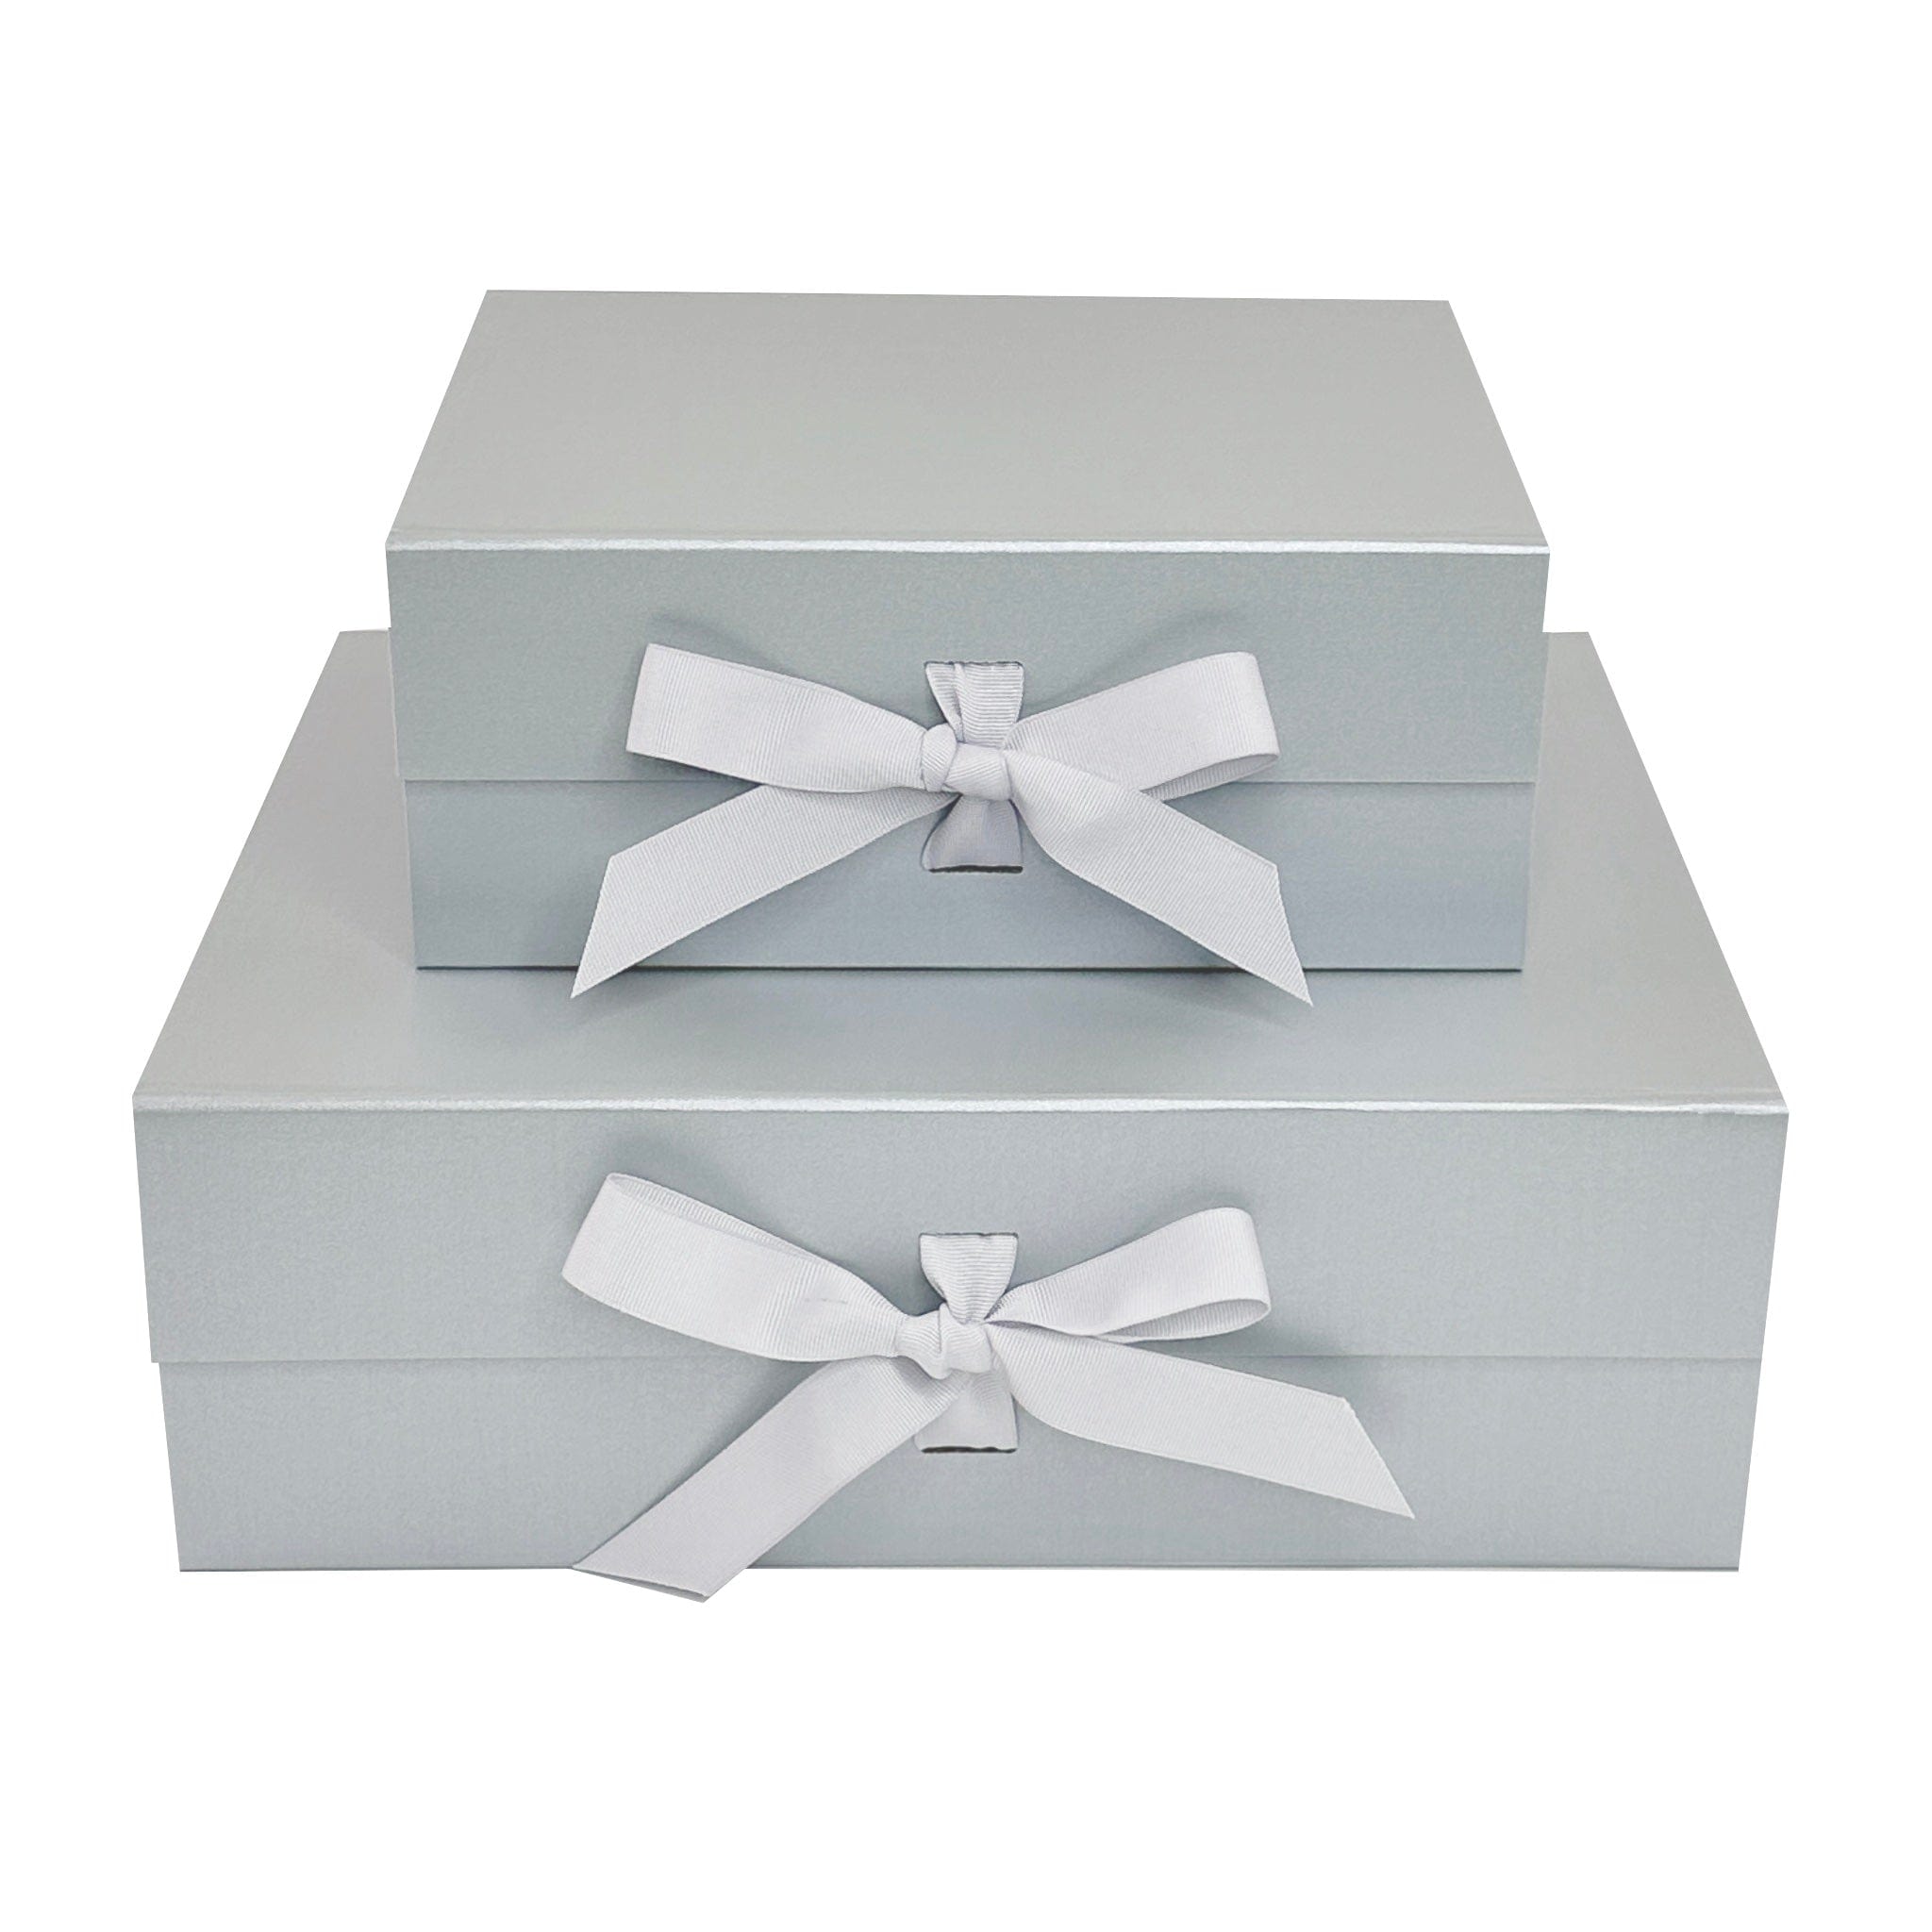 China Custom Magnetic Gift Box Luxury Hardcover Packaging Box Suppliers,  Manufacturers - Factory Direct Wholesale - ZHONGTIAN